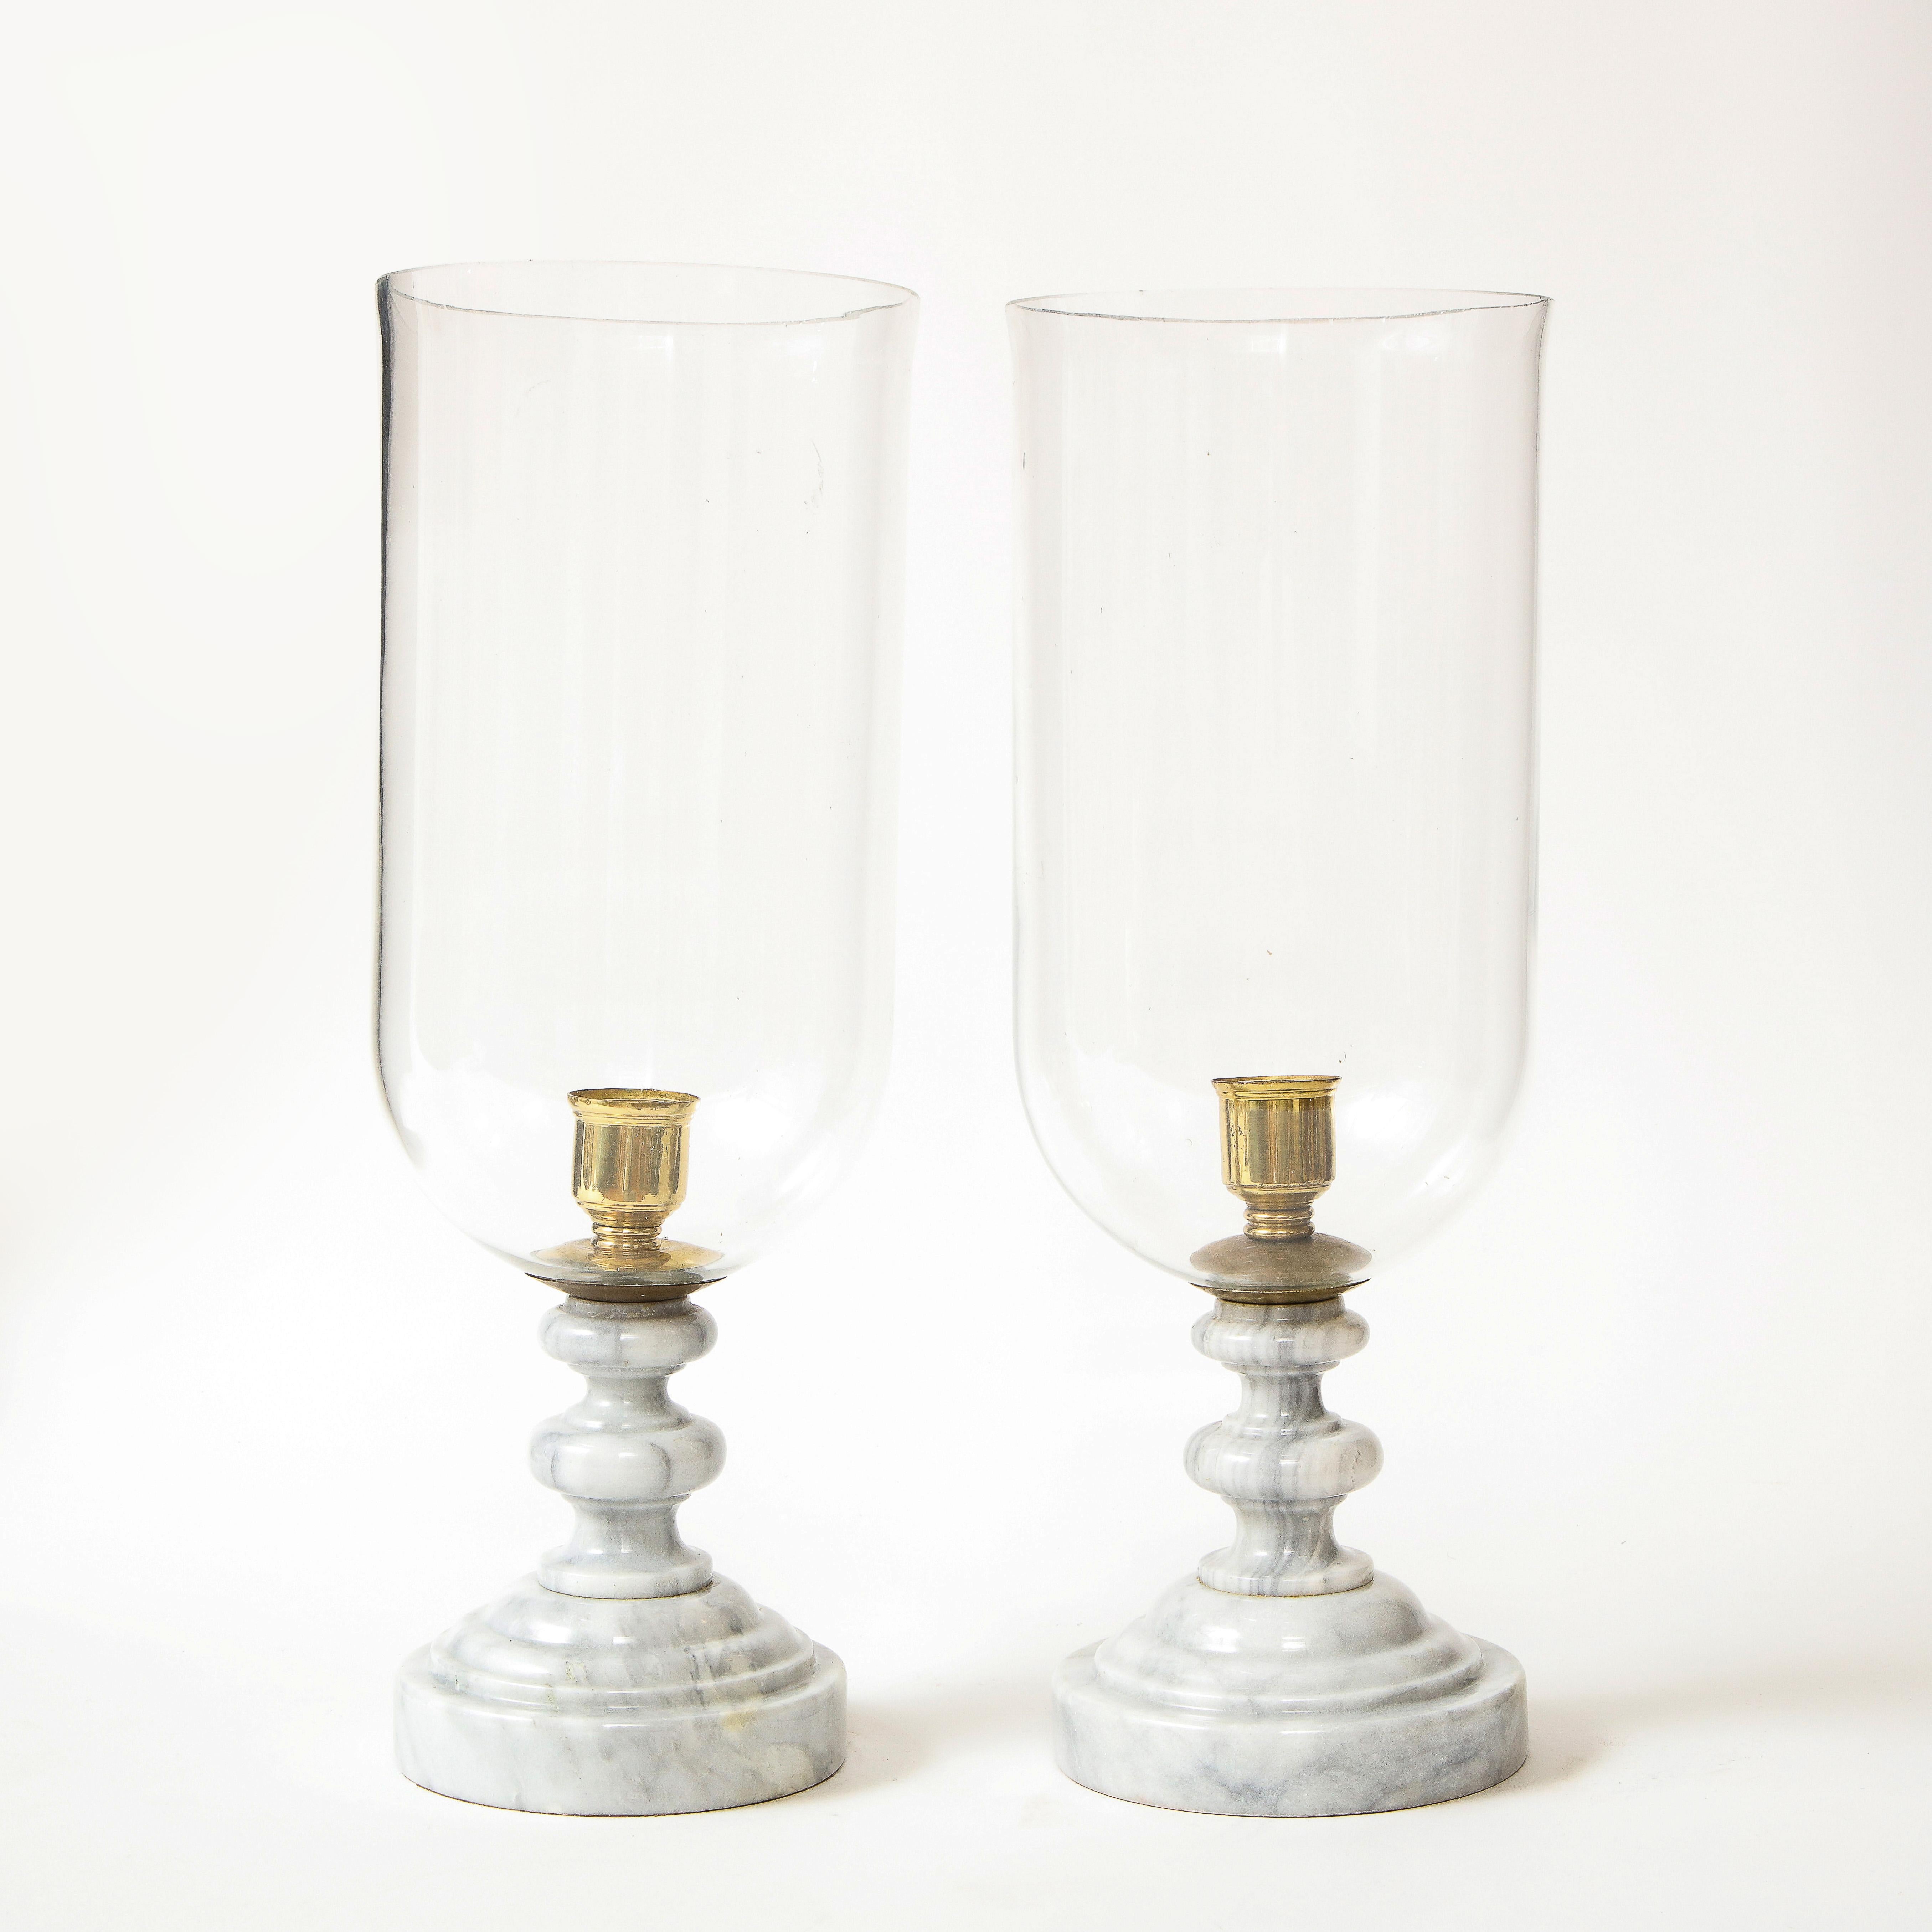 Each with a glass hurricane shade mounted on a turned polished marble base.